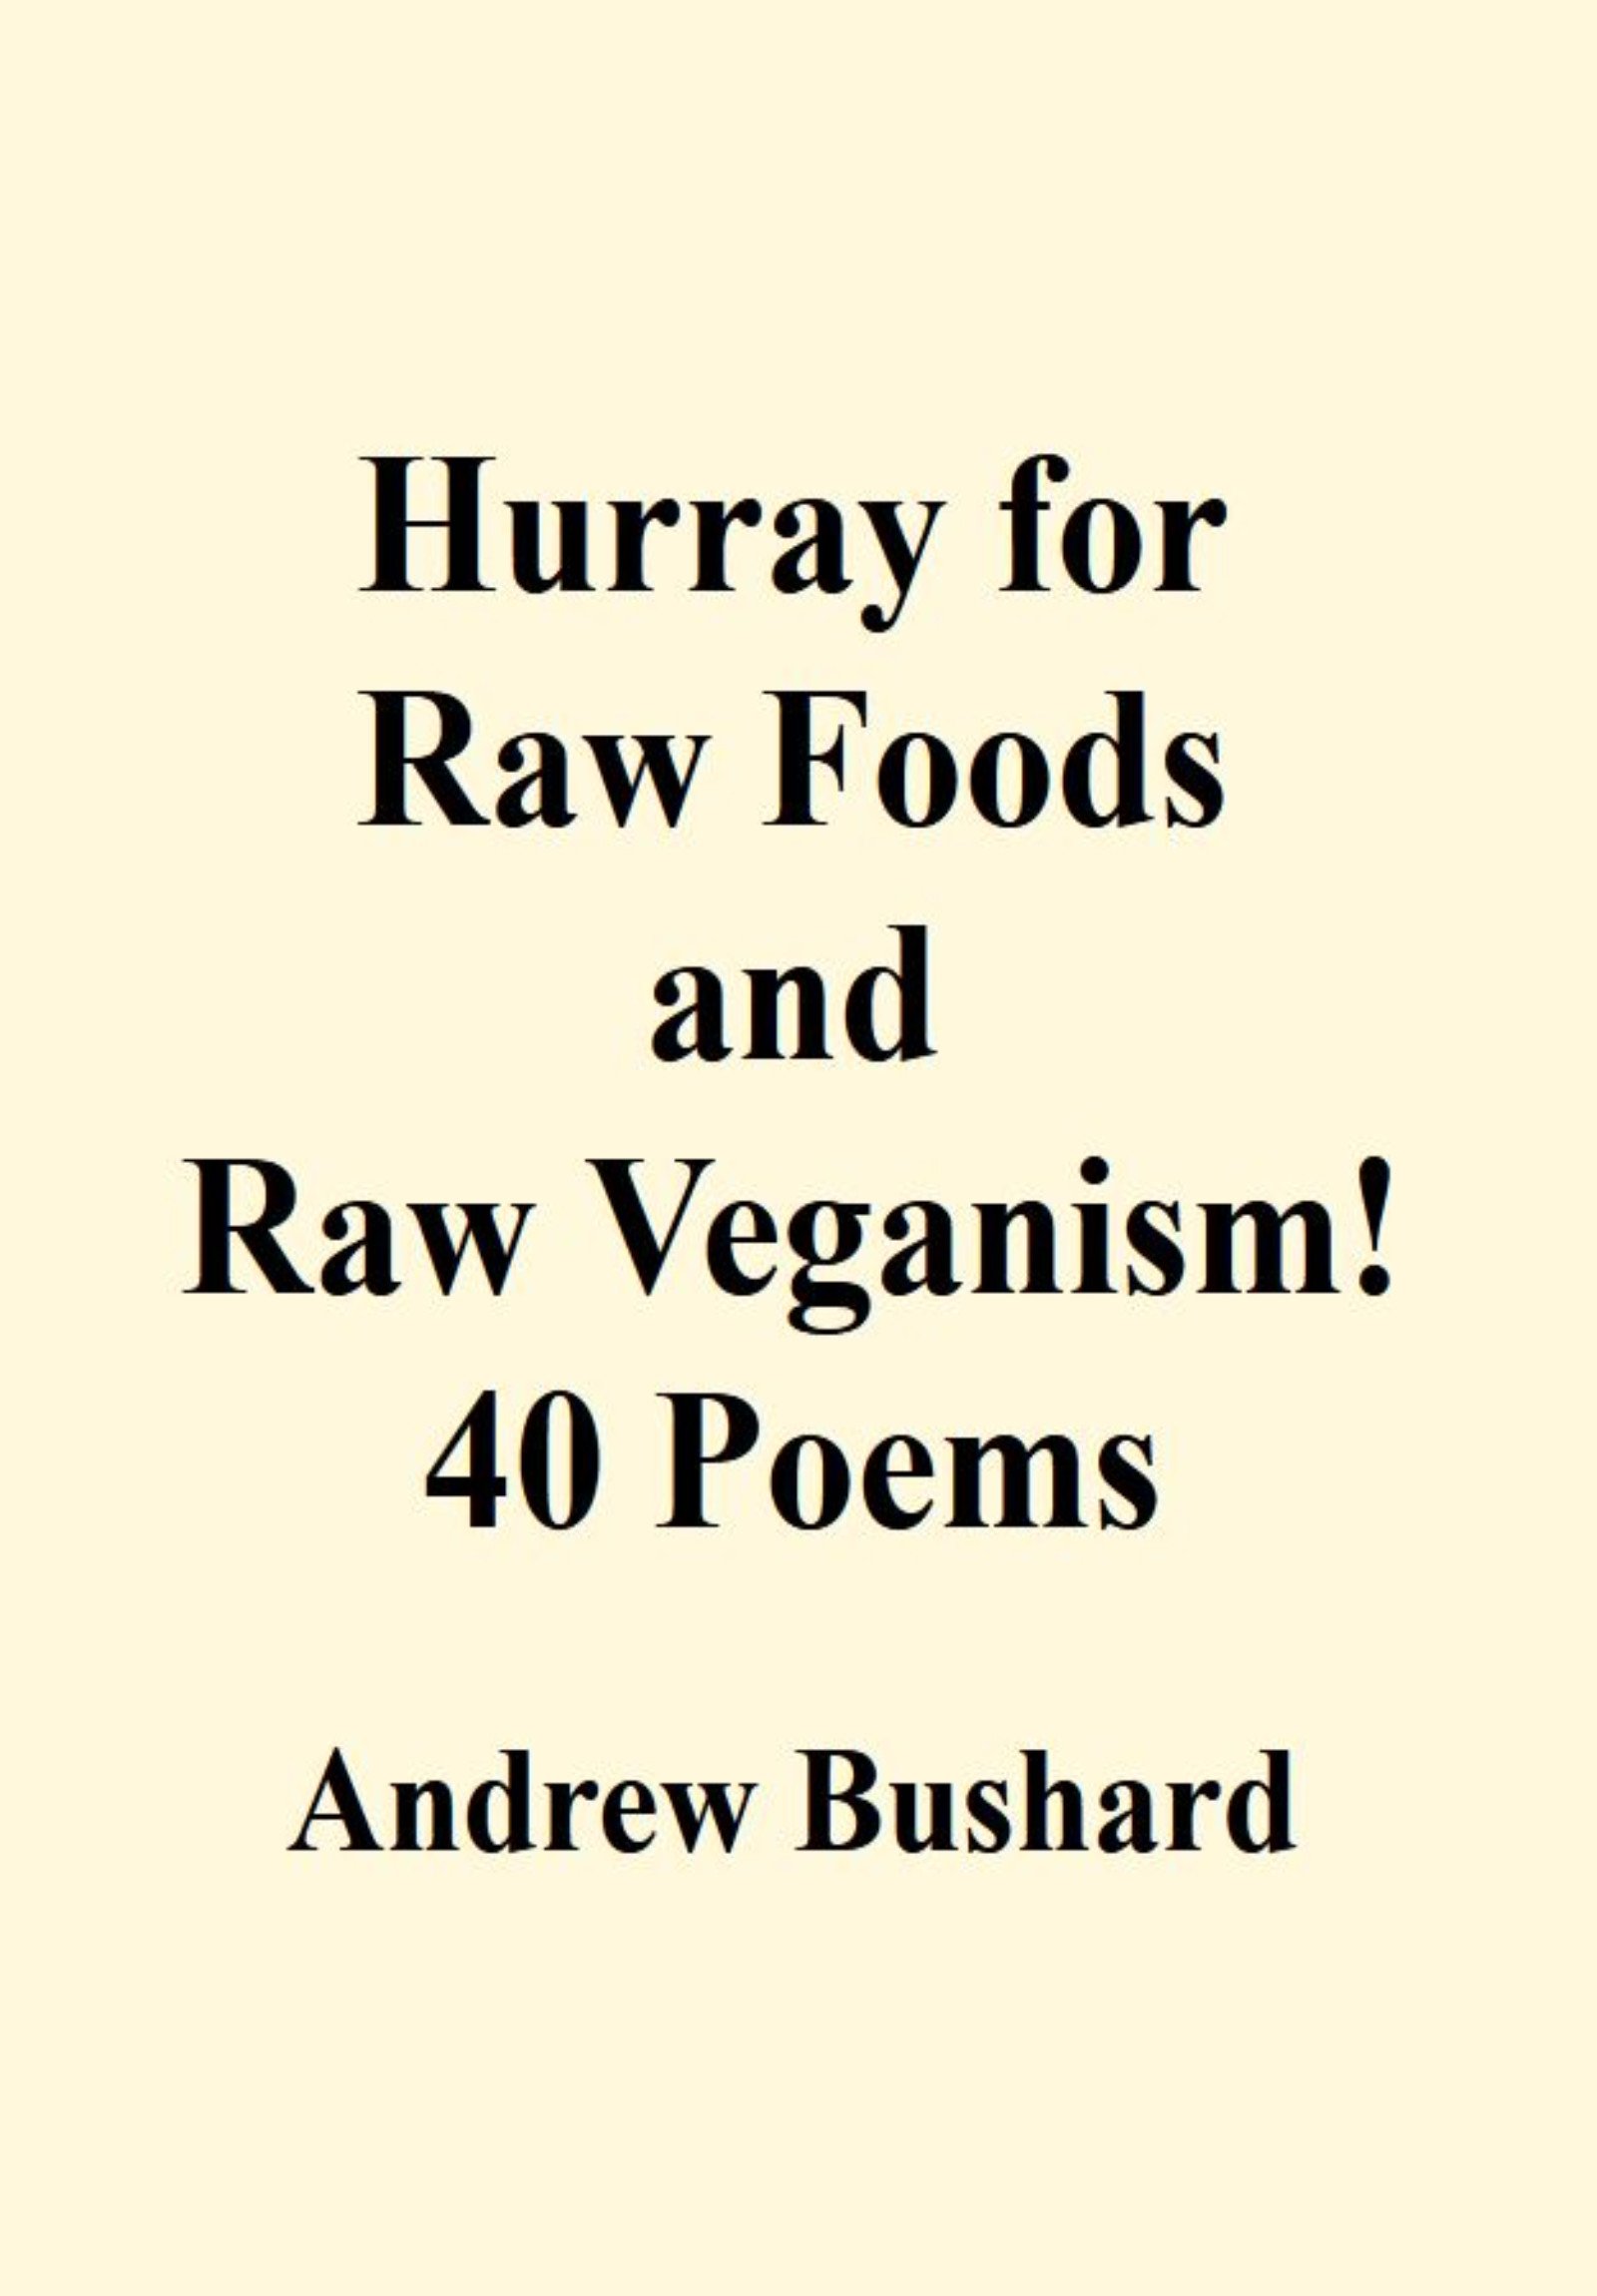 Hurray for Raw Foods and Raw Veganism: 40 Poems's featured image